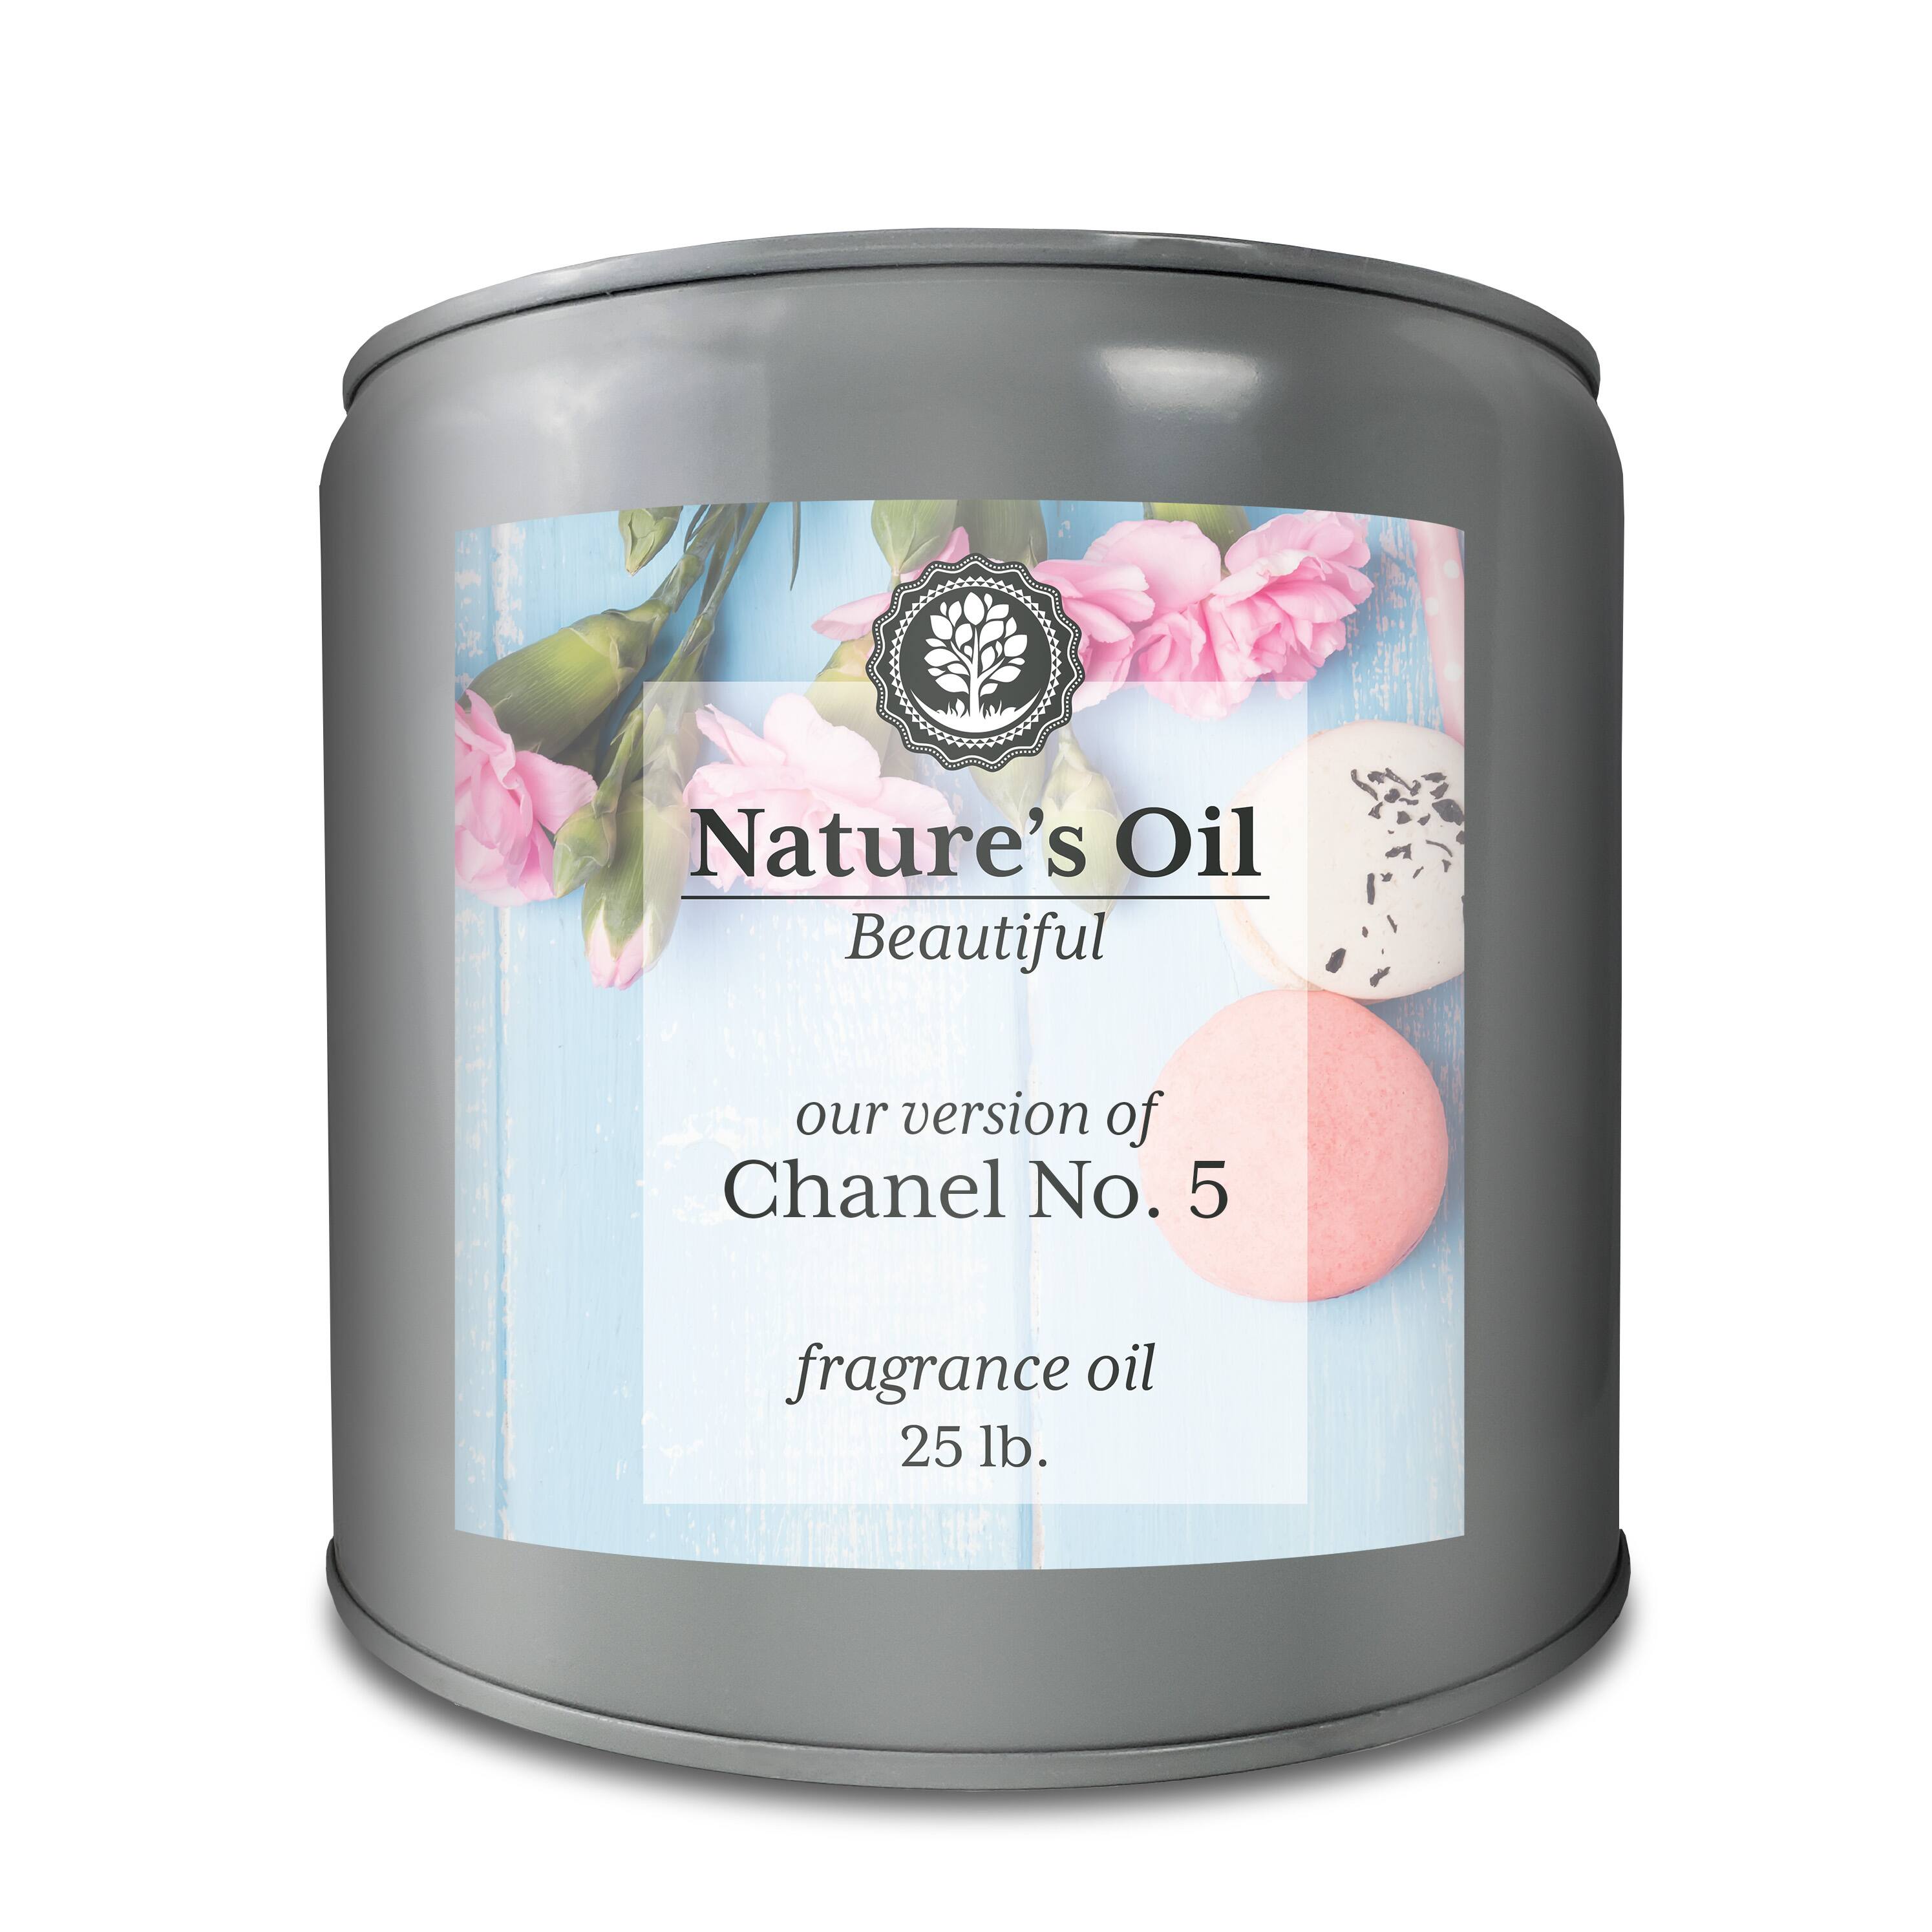 Chance (our version of) Fragrance Oil